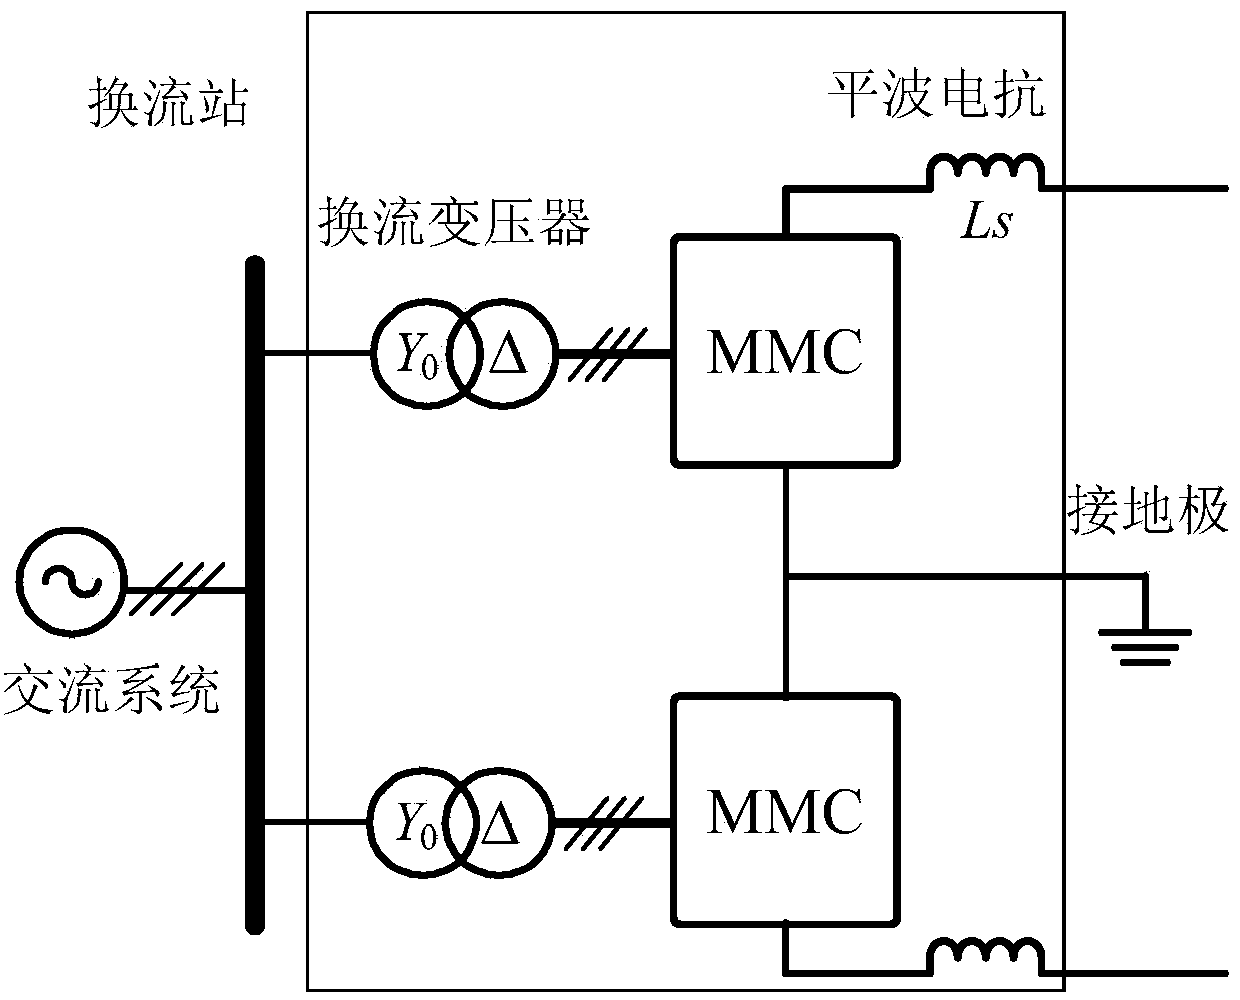 Calculating method for short-circuit current on direct current side of MMC-MTDC (modular multi-level converter-based multi-terminal direct-current transmission system)